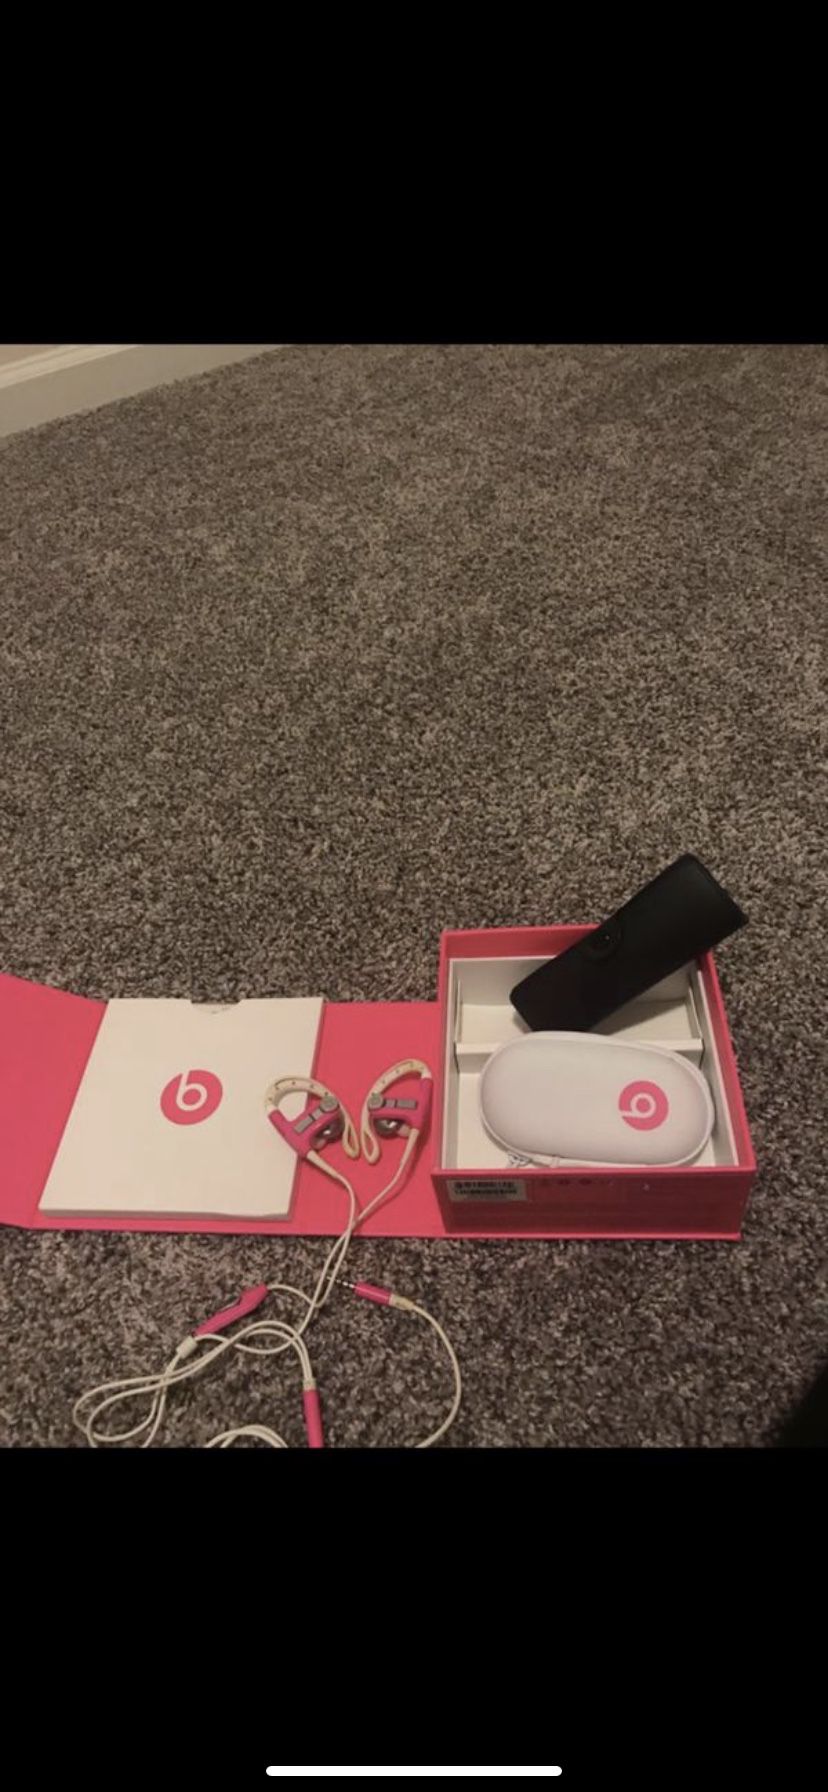 Pink and white Beats by Dr. Dre headphones